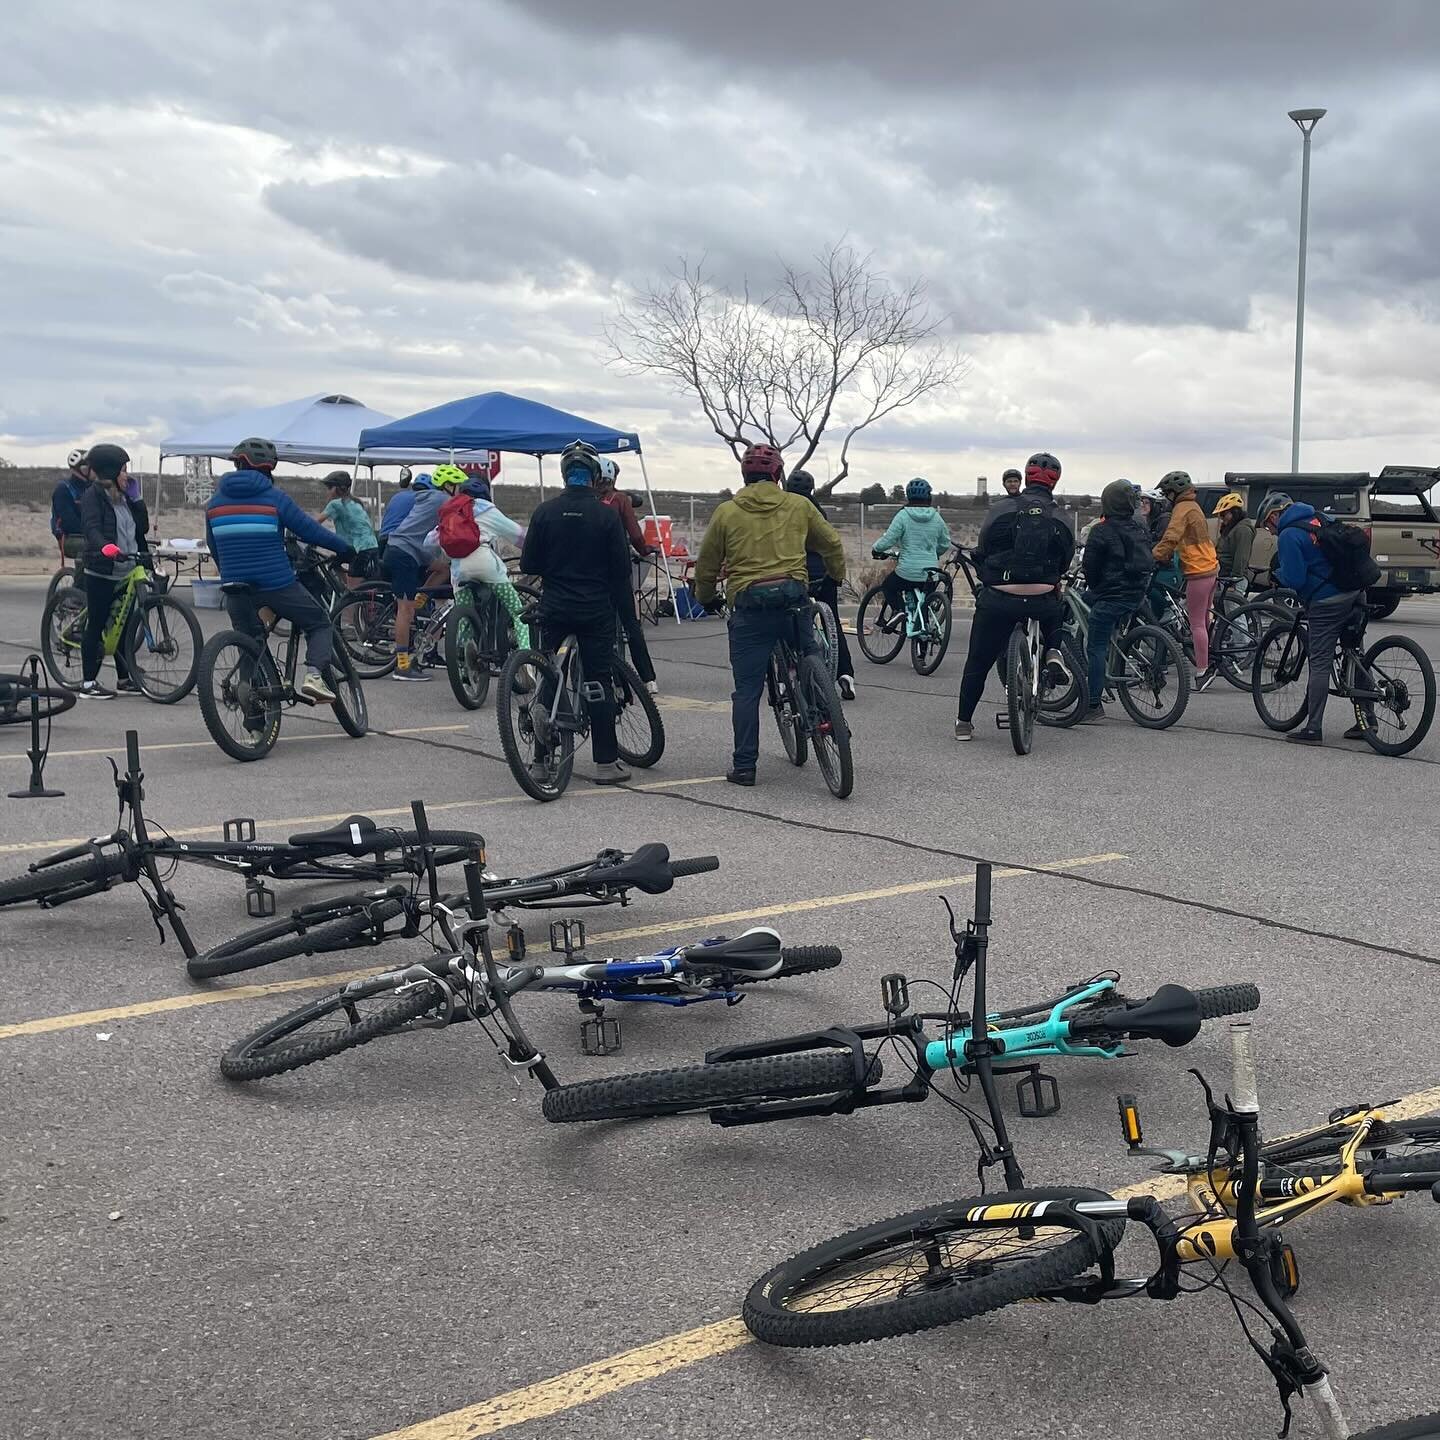 Riding bikes can be a great adventure. Especially when it&rsquo;s done together!! This last weekend&rsquo;s S&aacute;bados on Bikes with Friends was exactly that! We had to cut the ride short due to the rain and cold but we all had a blast!  Thanks t